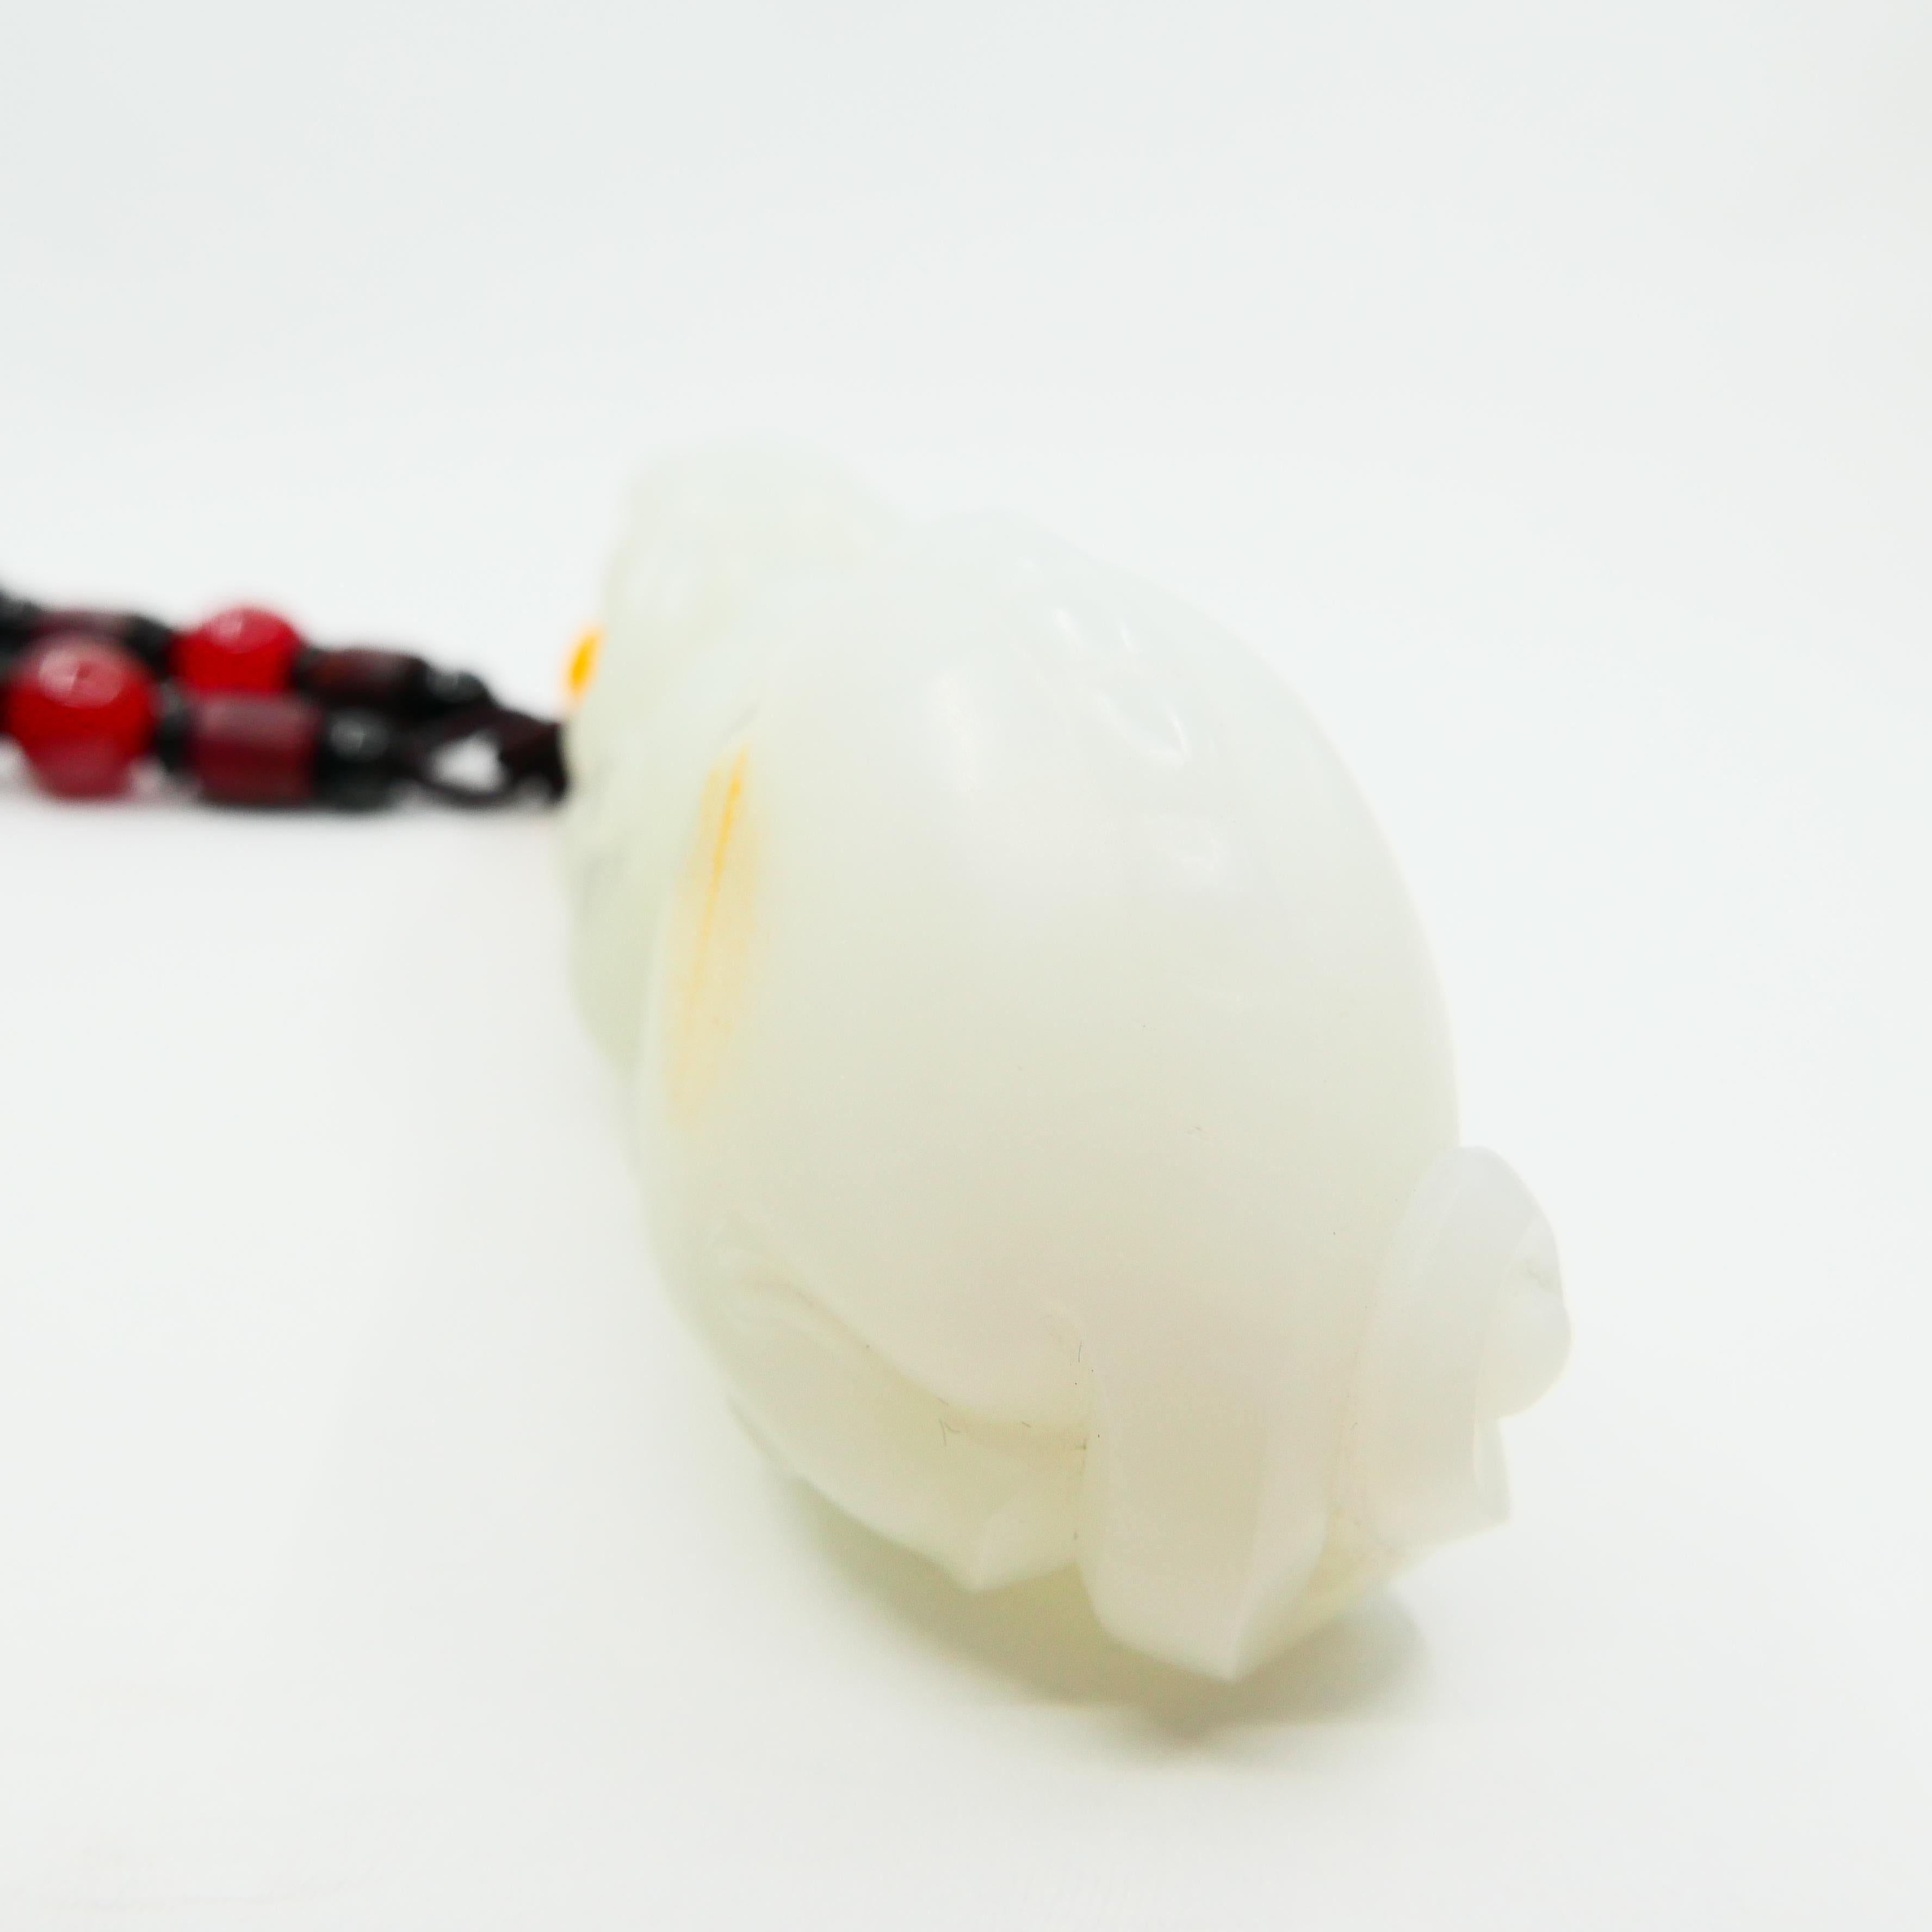 Certified Nephrite White Jade Mythical Creature, Heatian River Pebble Material For Sale 2